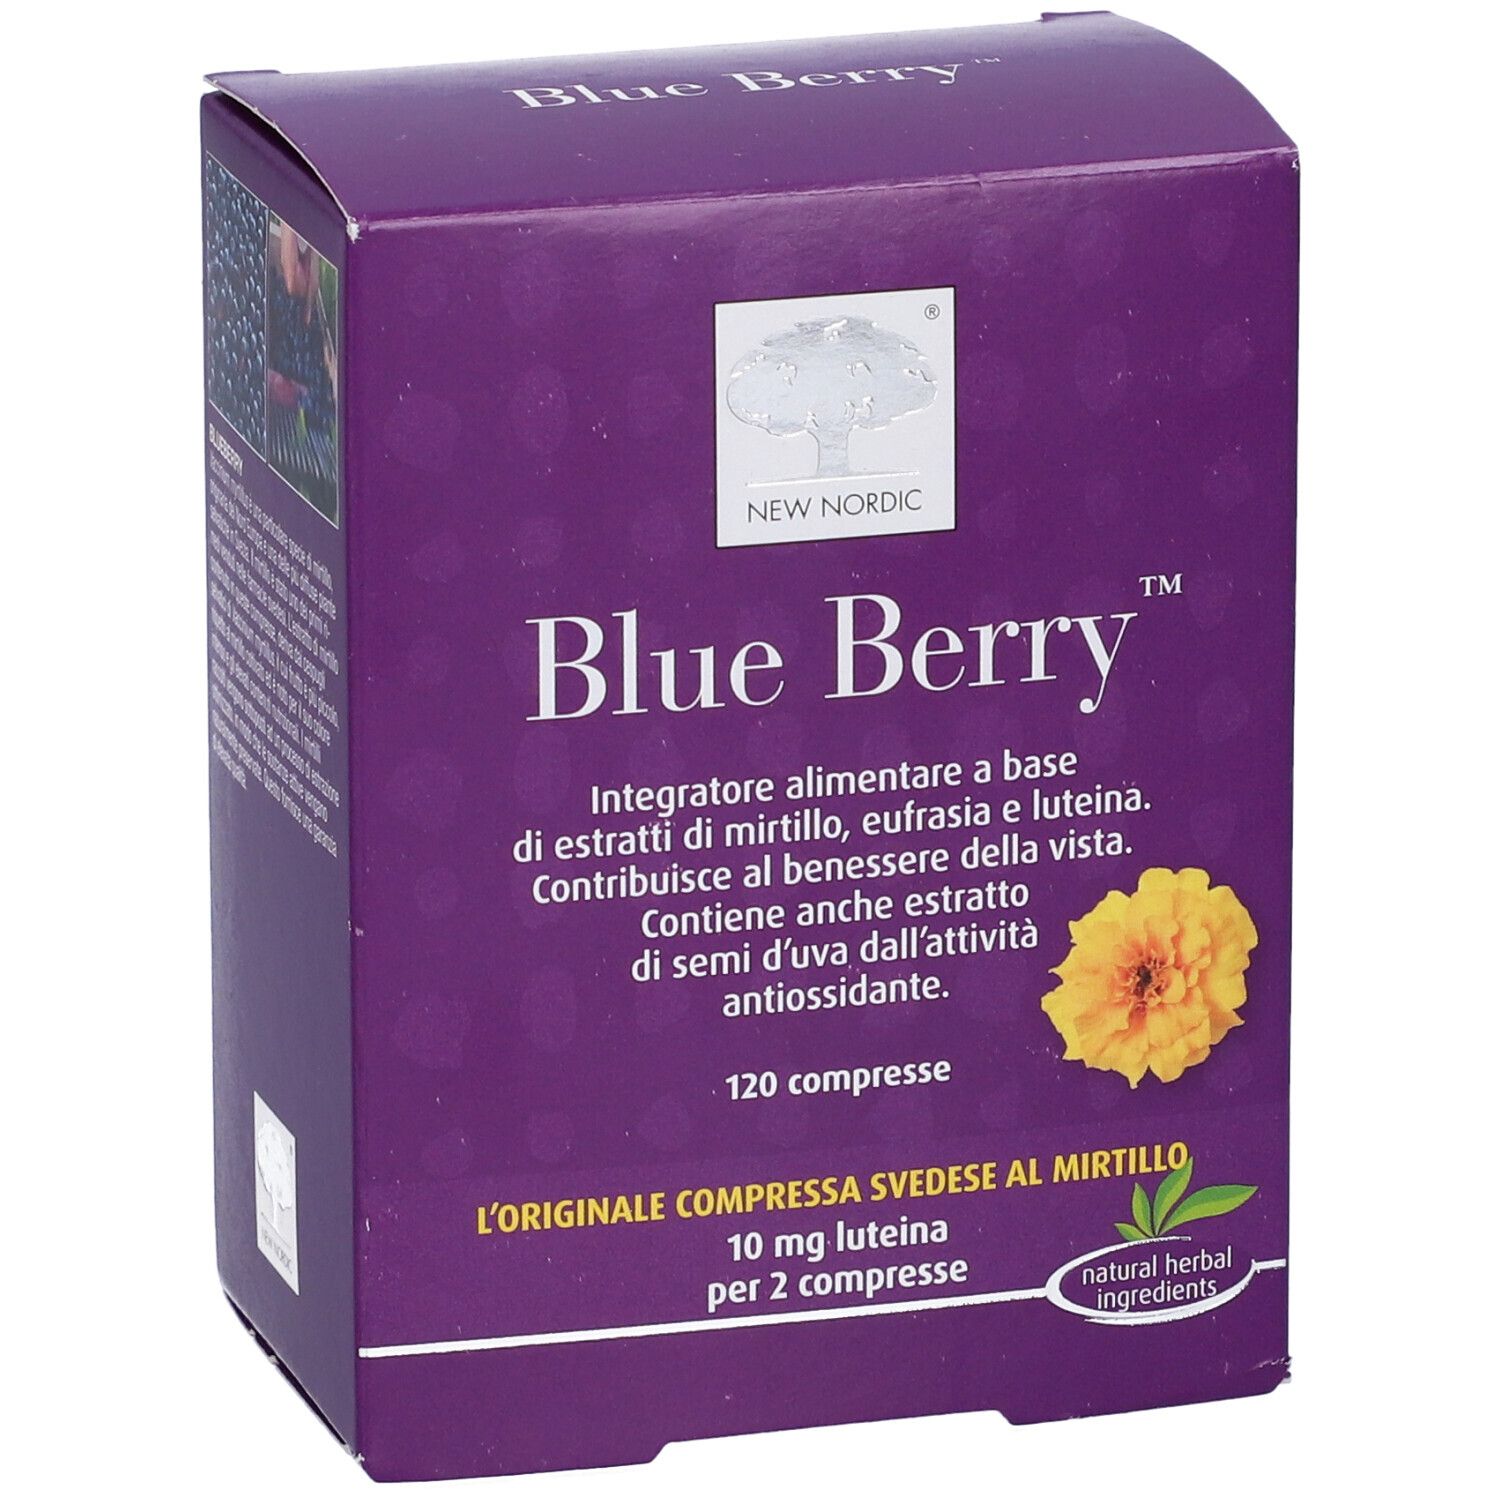 New Nordic Blue Berry™